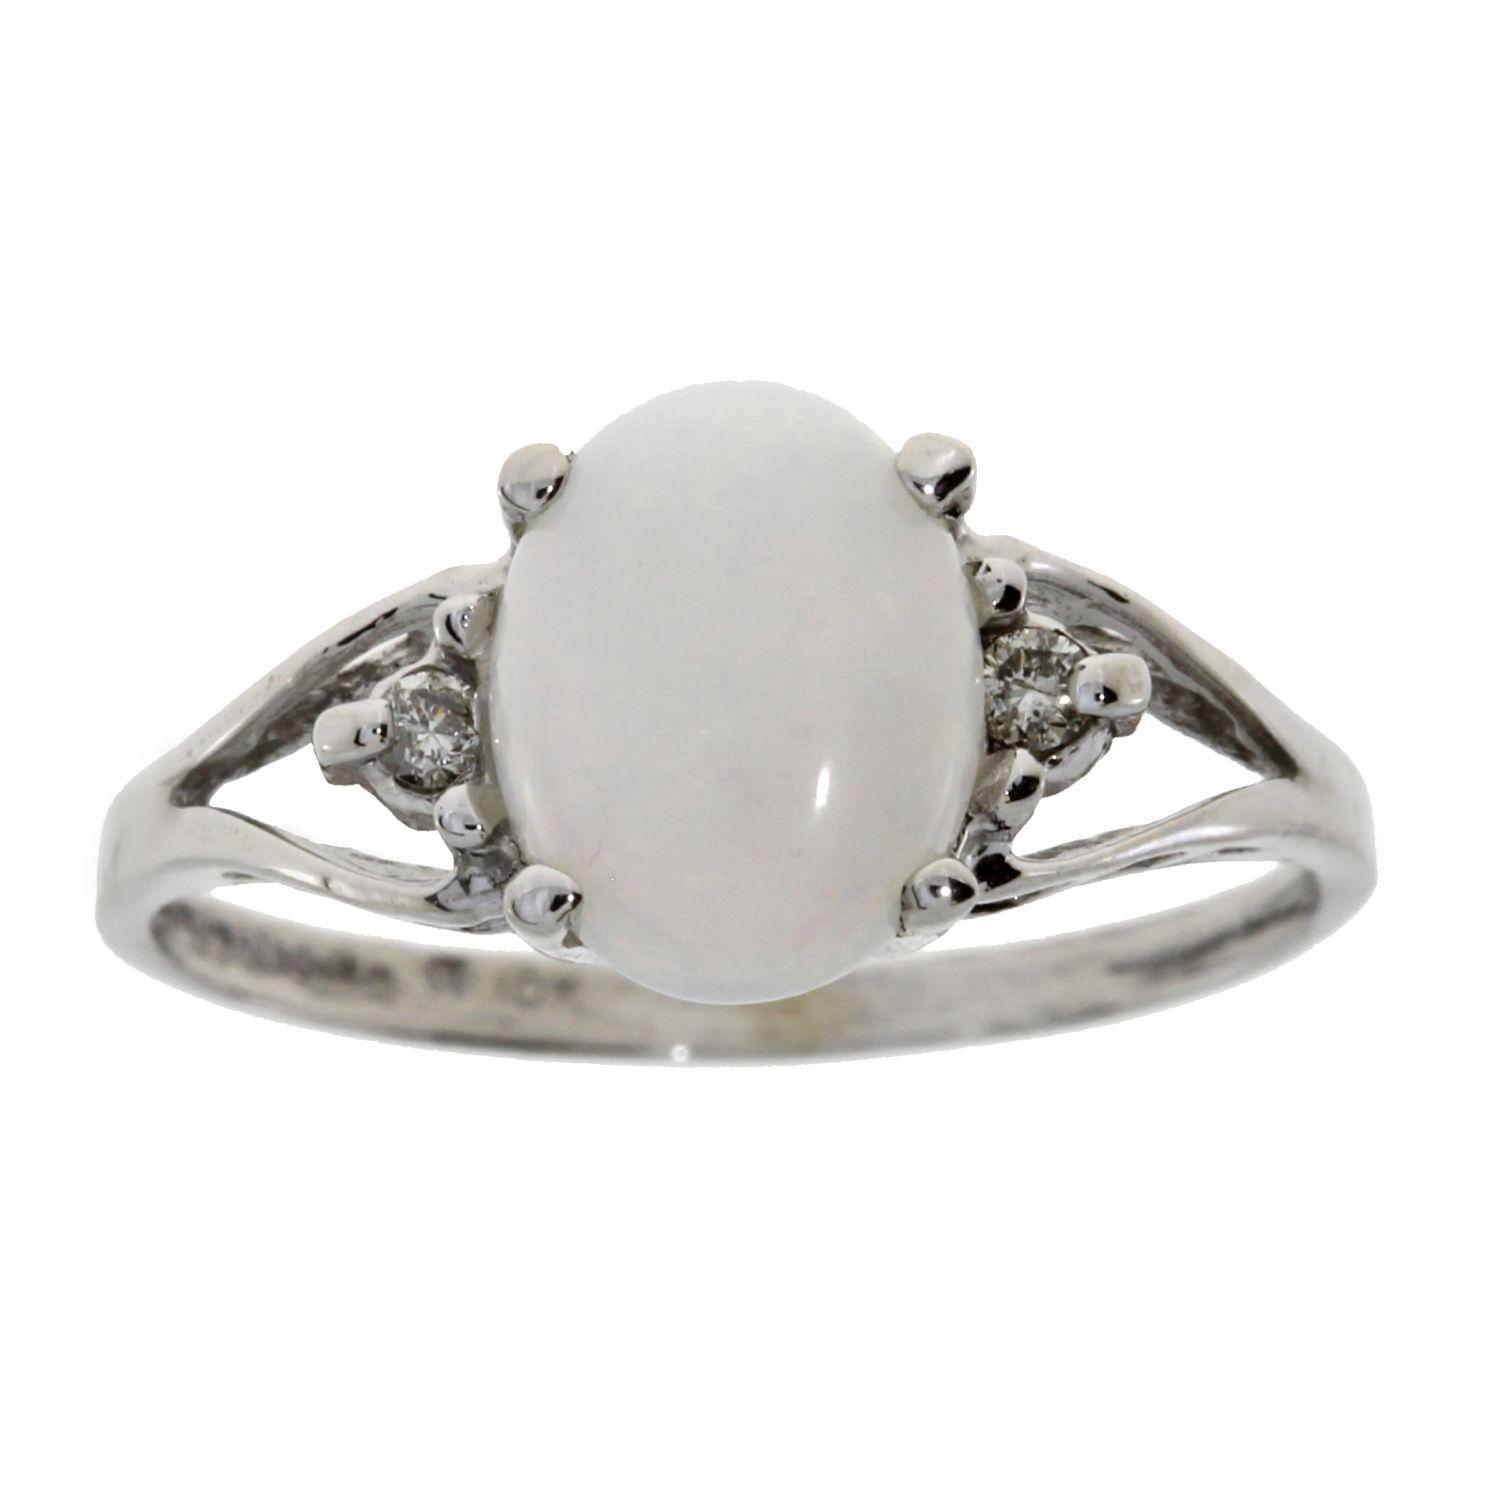 Opal and 0.05ct Diamond ring in 10kt White Gold. Ring size 7. Diamonds are I-J color, round, I1-I3 c